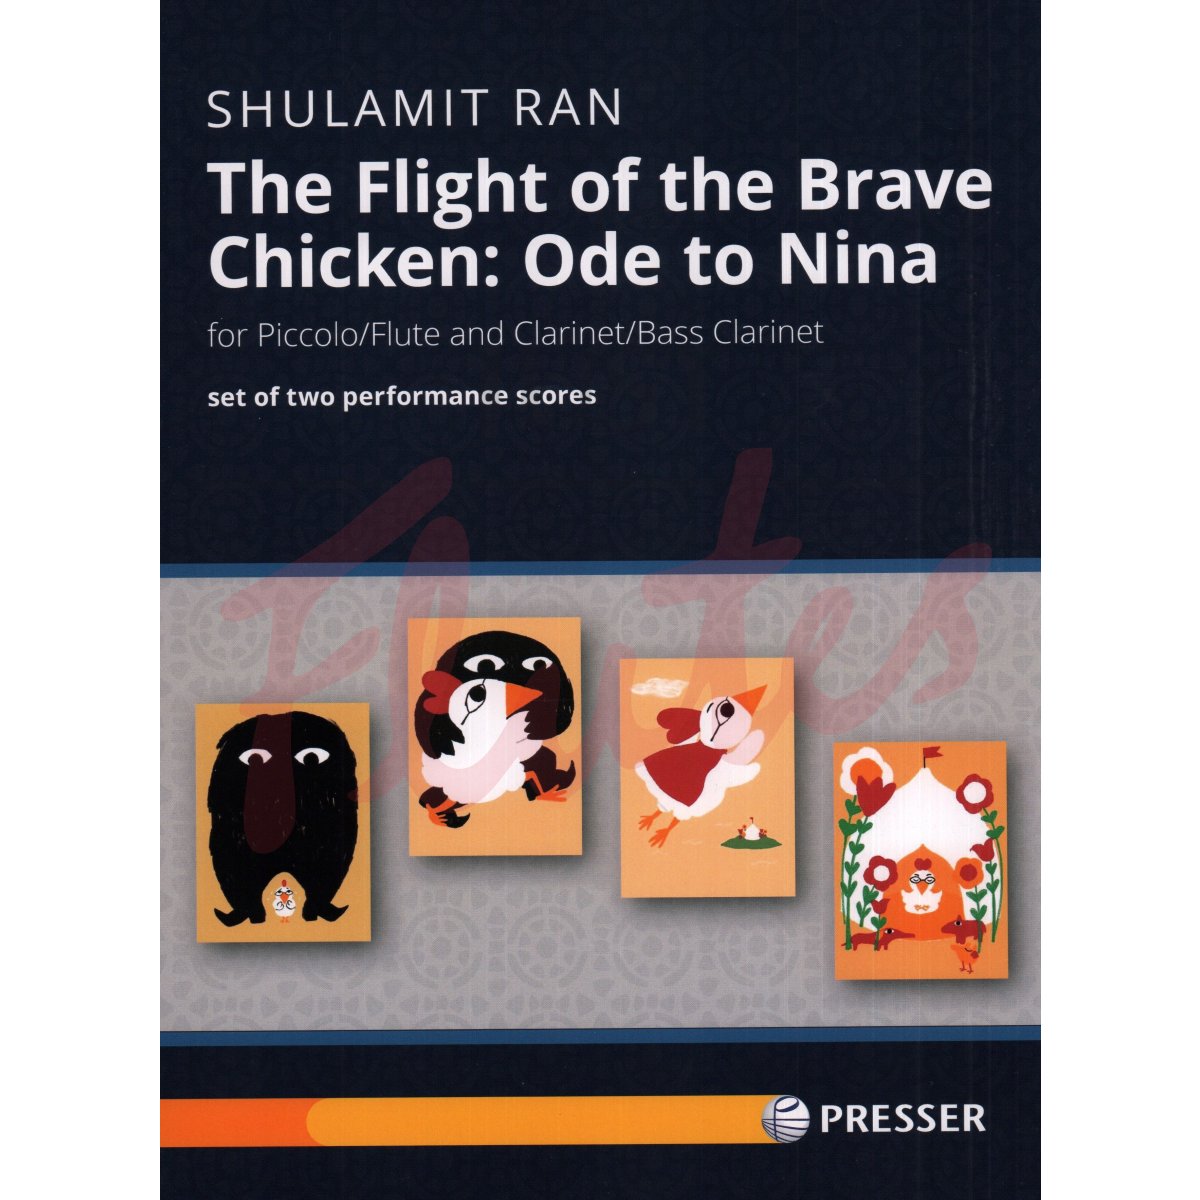 The Flight of the Brave Chicken: Ode to Nina for Flute and Clarinet